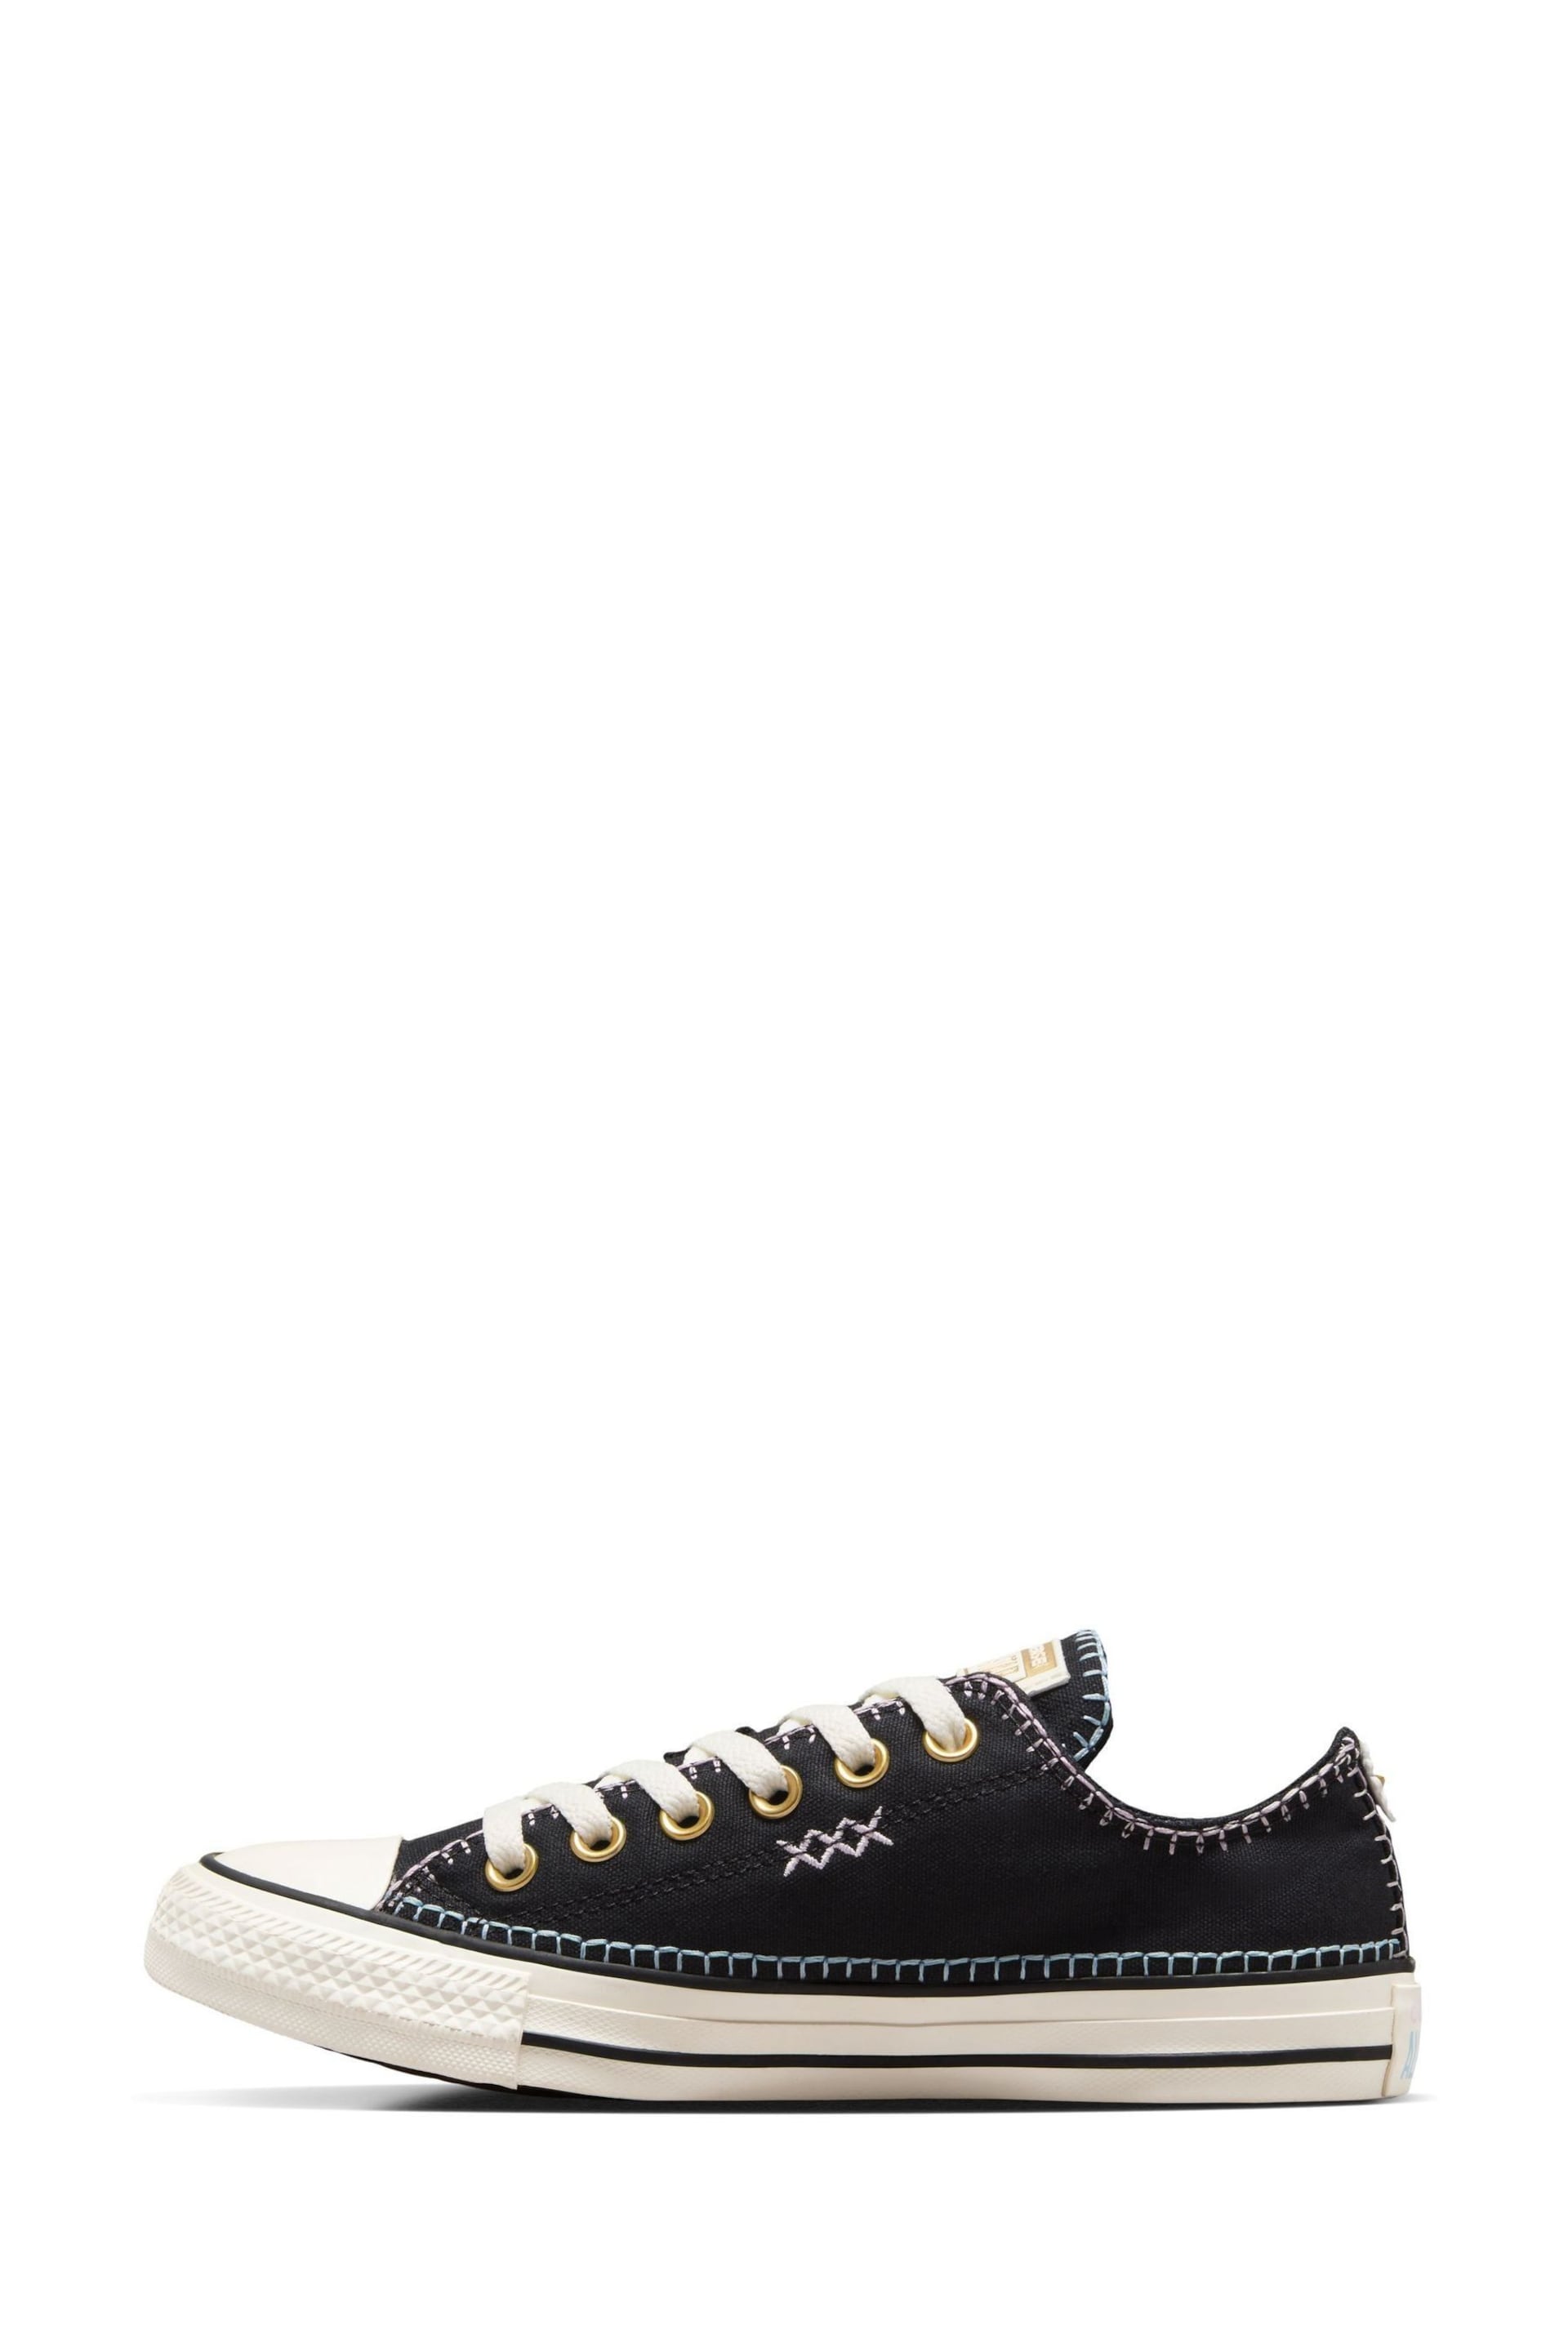 Converse Black Chuck Taylor All Star Crafted Stitching Ox Trainers - Image 2 of 10